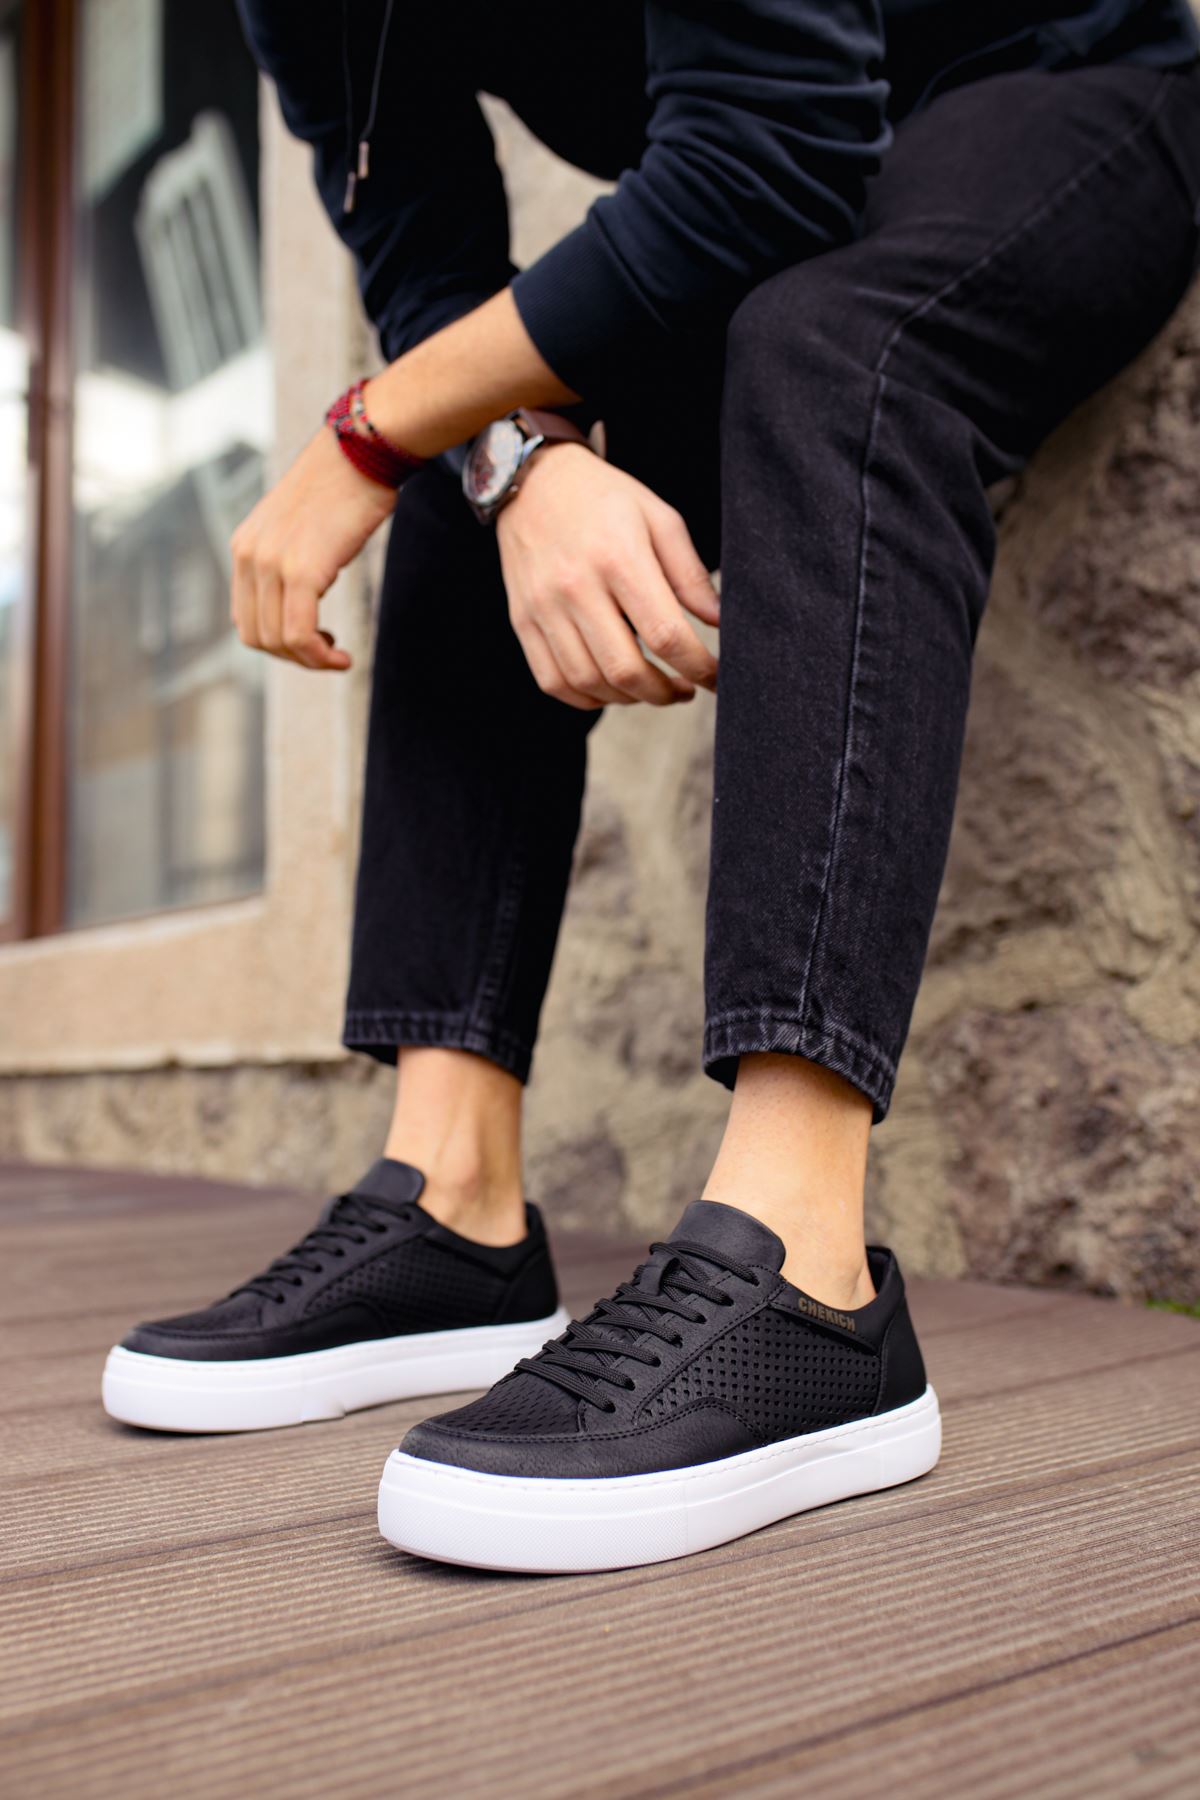 Chekich Men's Sneakers Black Color Artificial Leather Lace Up 2021 Model Casual Shoes Office Formal Vulcanized Lightweight Odorless Sewing Outsole Breathable Multi Color Options Flat Comfortable Suits CH015